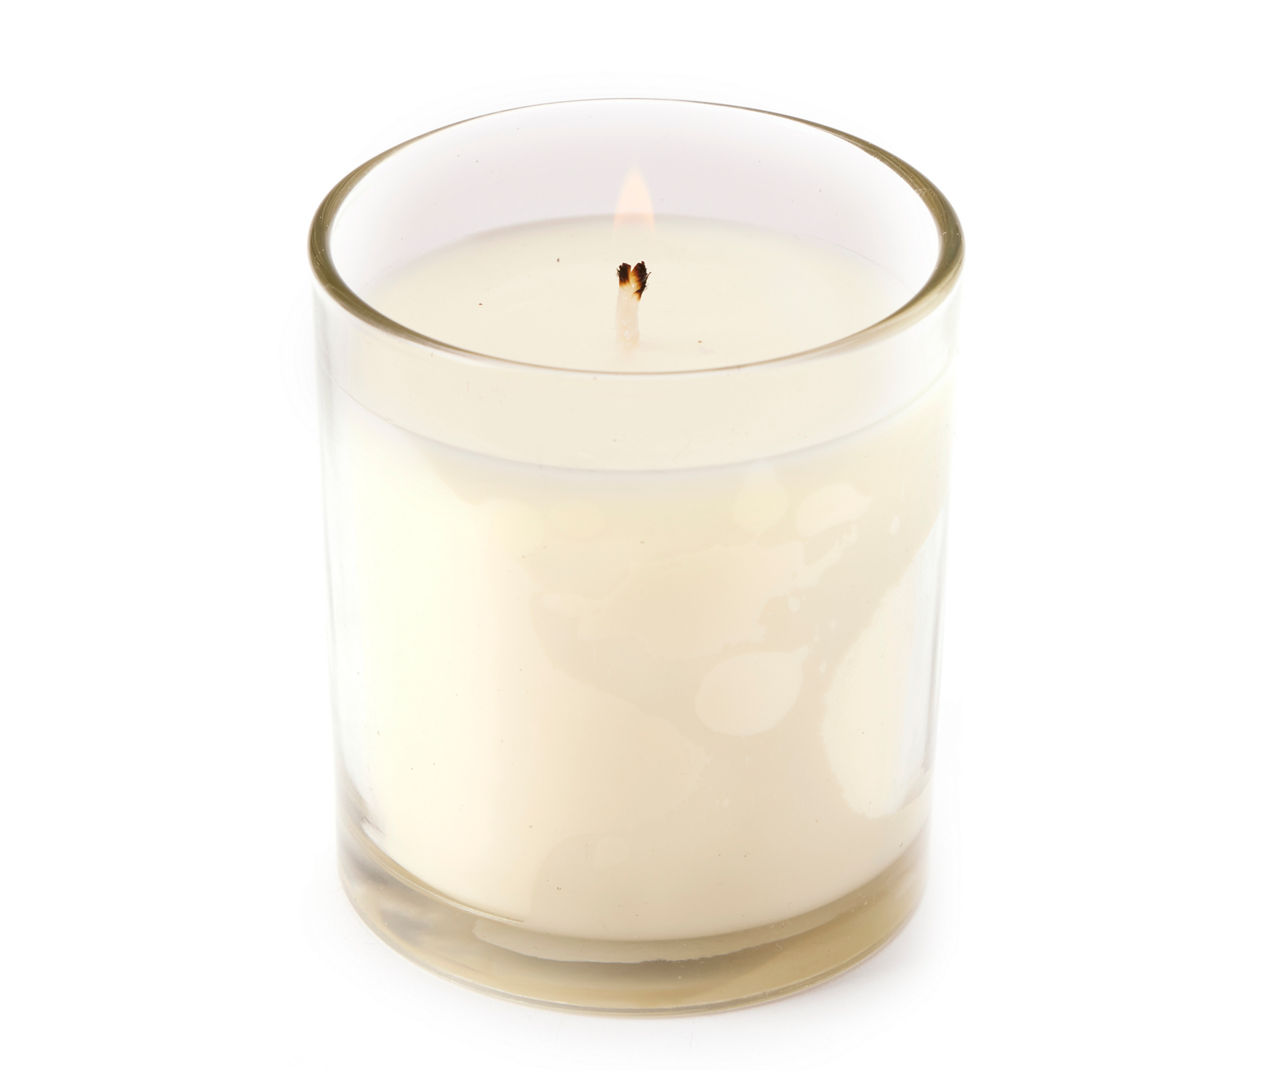 Z CANDLES White Tea, Amber Jar Candle 8 oz. amber8whitetea - The Home Depot